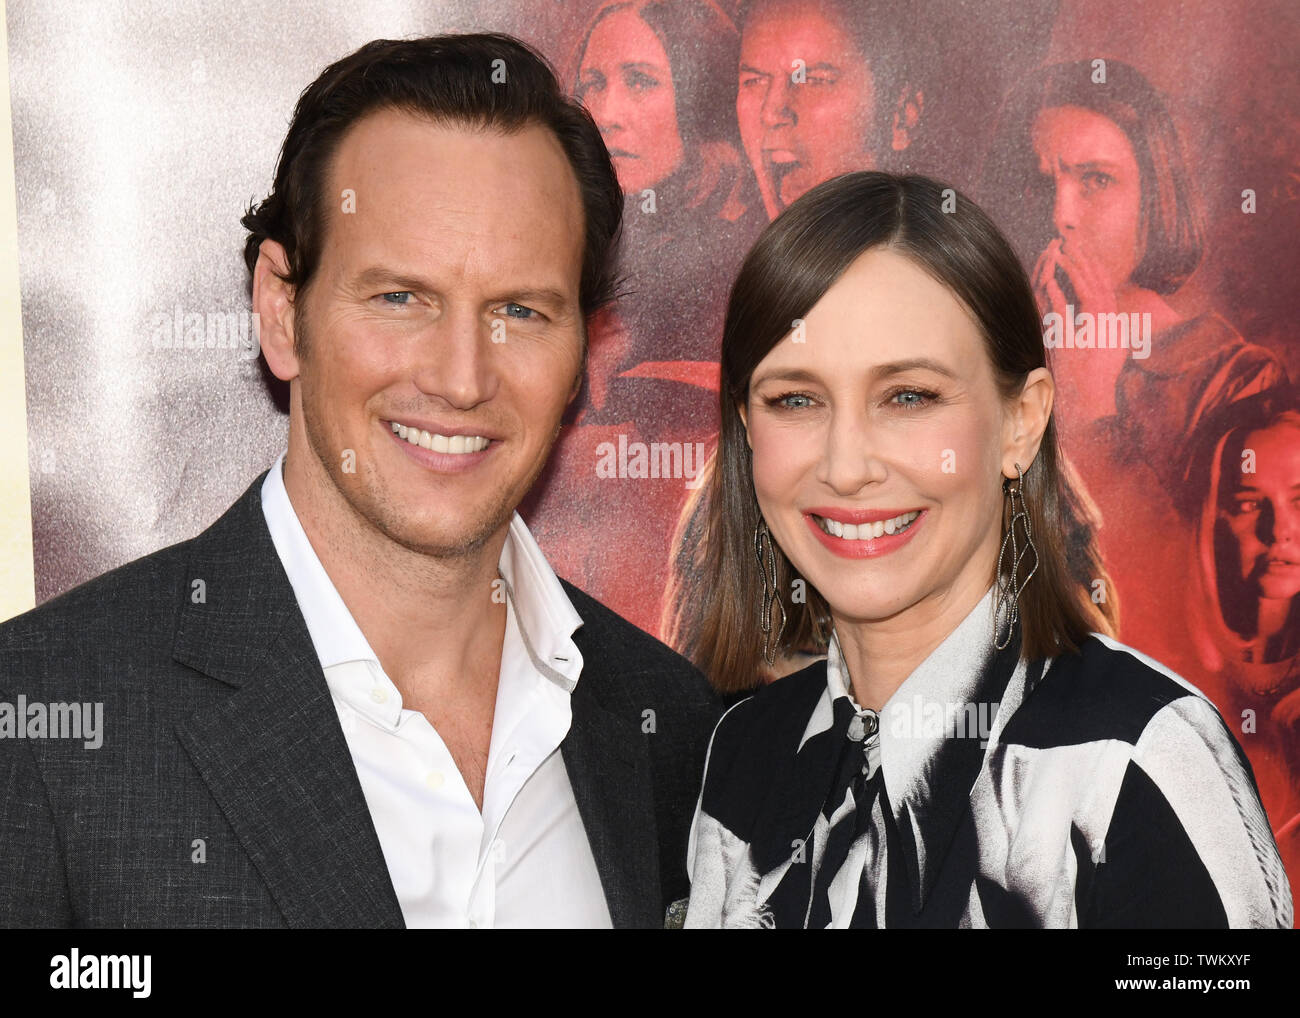 June 20, 2019 - Westwood, California, USA - 17, June 2019 - Westwood, California. Patrick Wilson and Vera Farmiga attends the World Premiere of 'Annabelle Comes Home' at the Regency Village Theatre. (Credit Image: © Billy Bennight/ZUMA Wire) Stock Photo